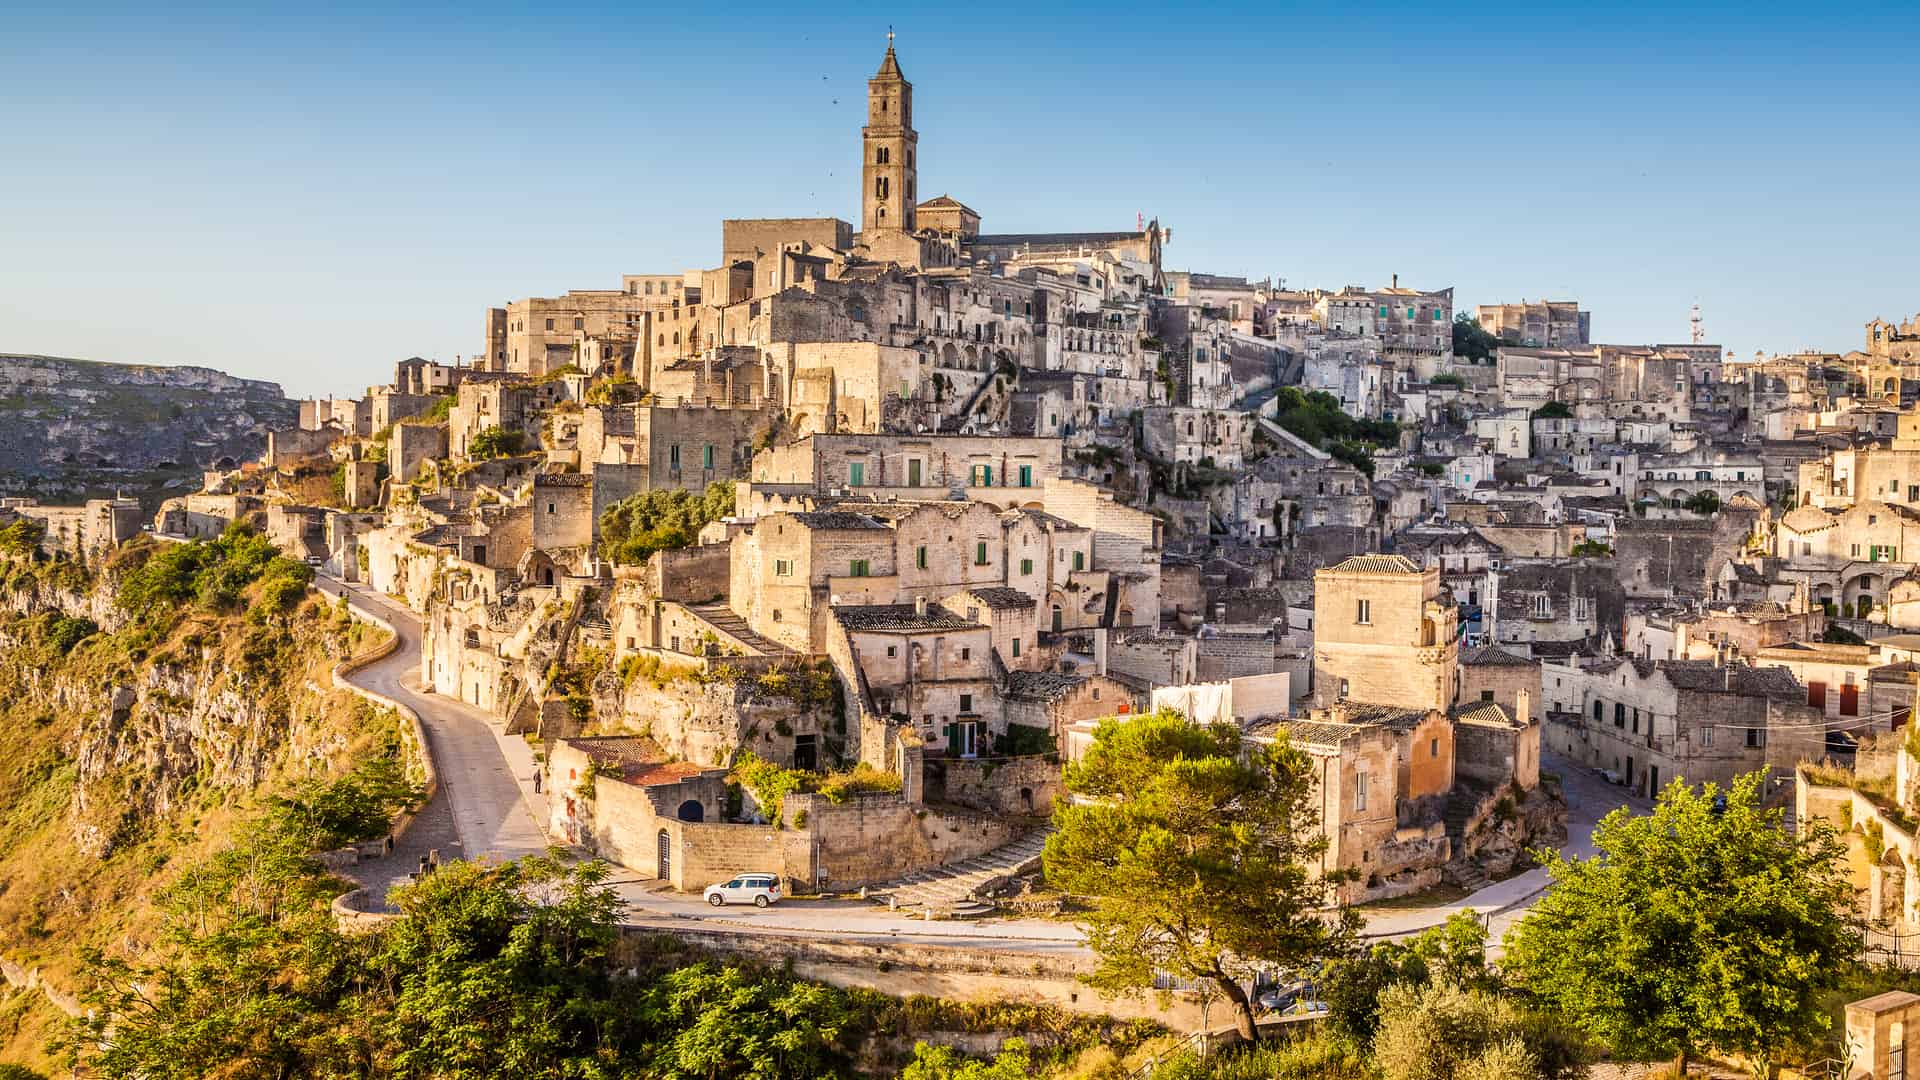 The Ultimate Guide to Matera, Italy - Totochie